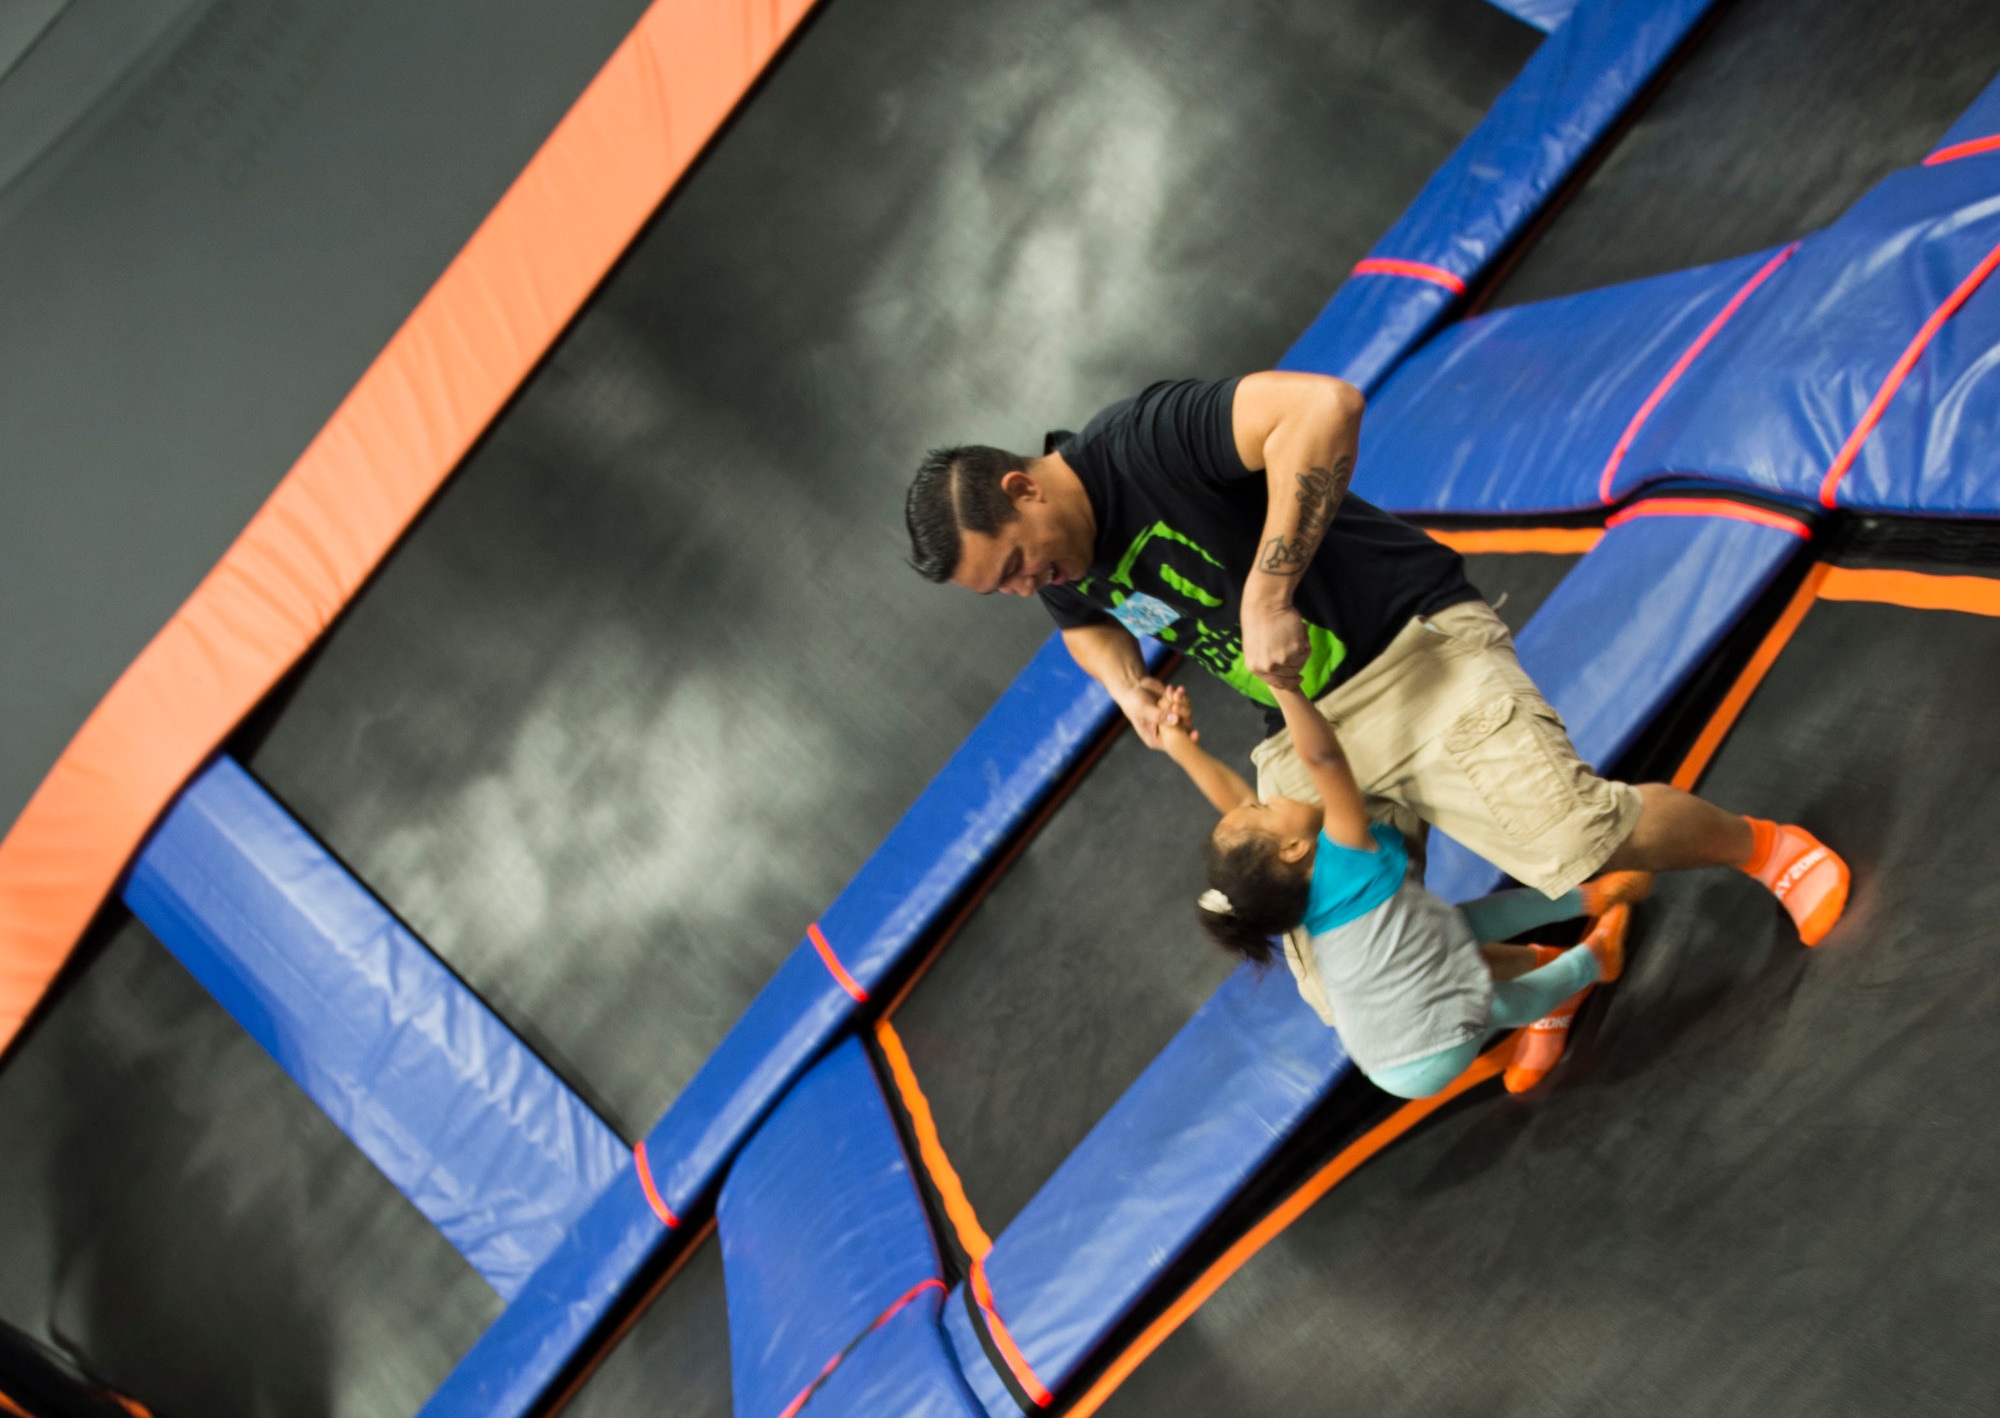 Staff Sgt. Patrick Rochester, a weapons load crew chief with the 1st Special Operations Maintenance Squadron, plays with his daughter, Aliyna Rochester, during a Hearts Apart event at the Sky Zone in Pensacola, Fla., Jan. 28, 2017. Hearts Apart is a program through the Hurlburt Field Airman and Family Readiness Center that connects spouses and loved ones of deployed Air Commandos to foster support systems. (U.S. Air Force photo by Senior Airman Krystal M. Garrett)